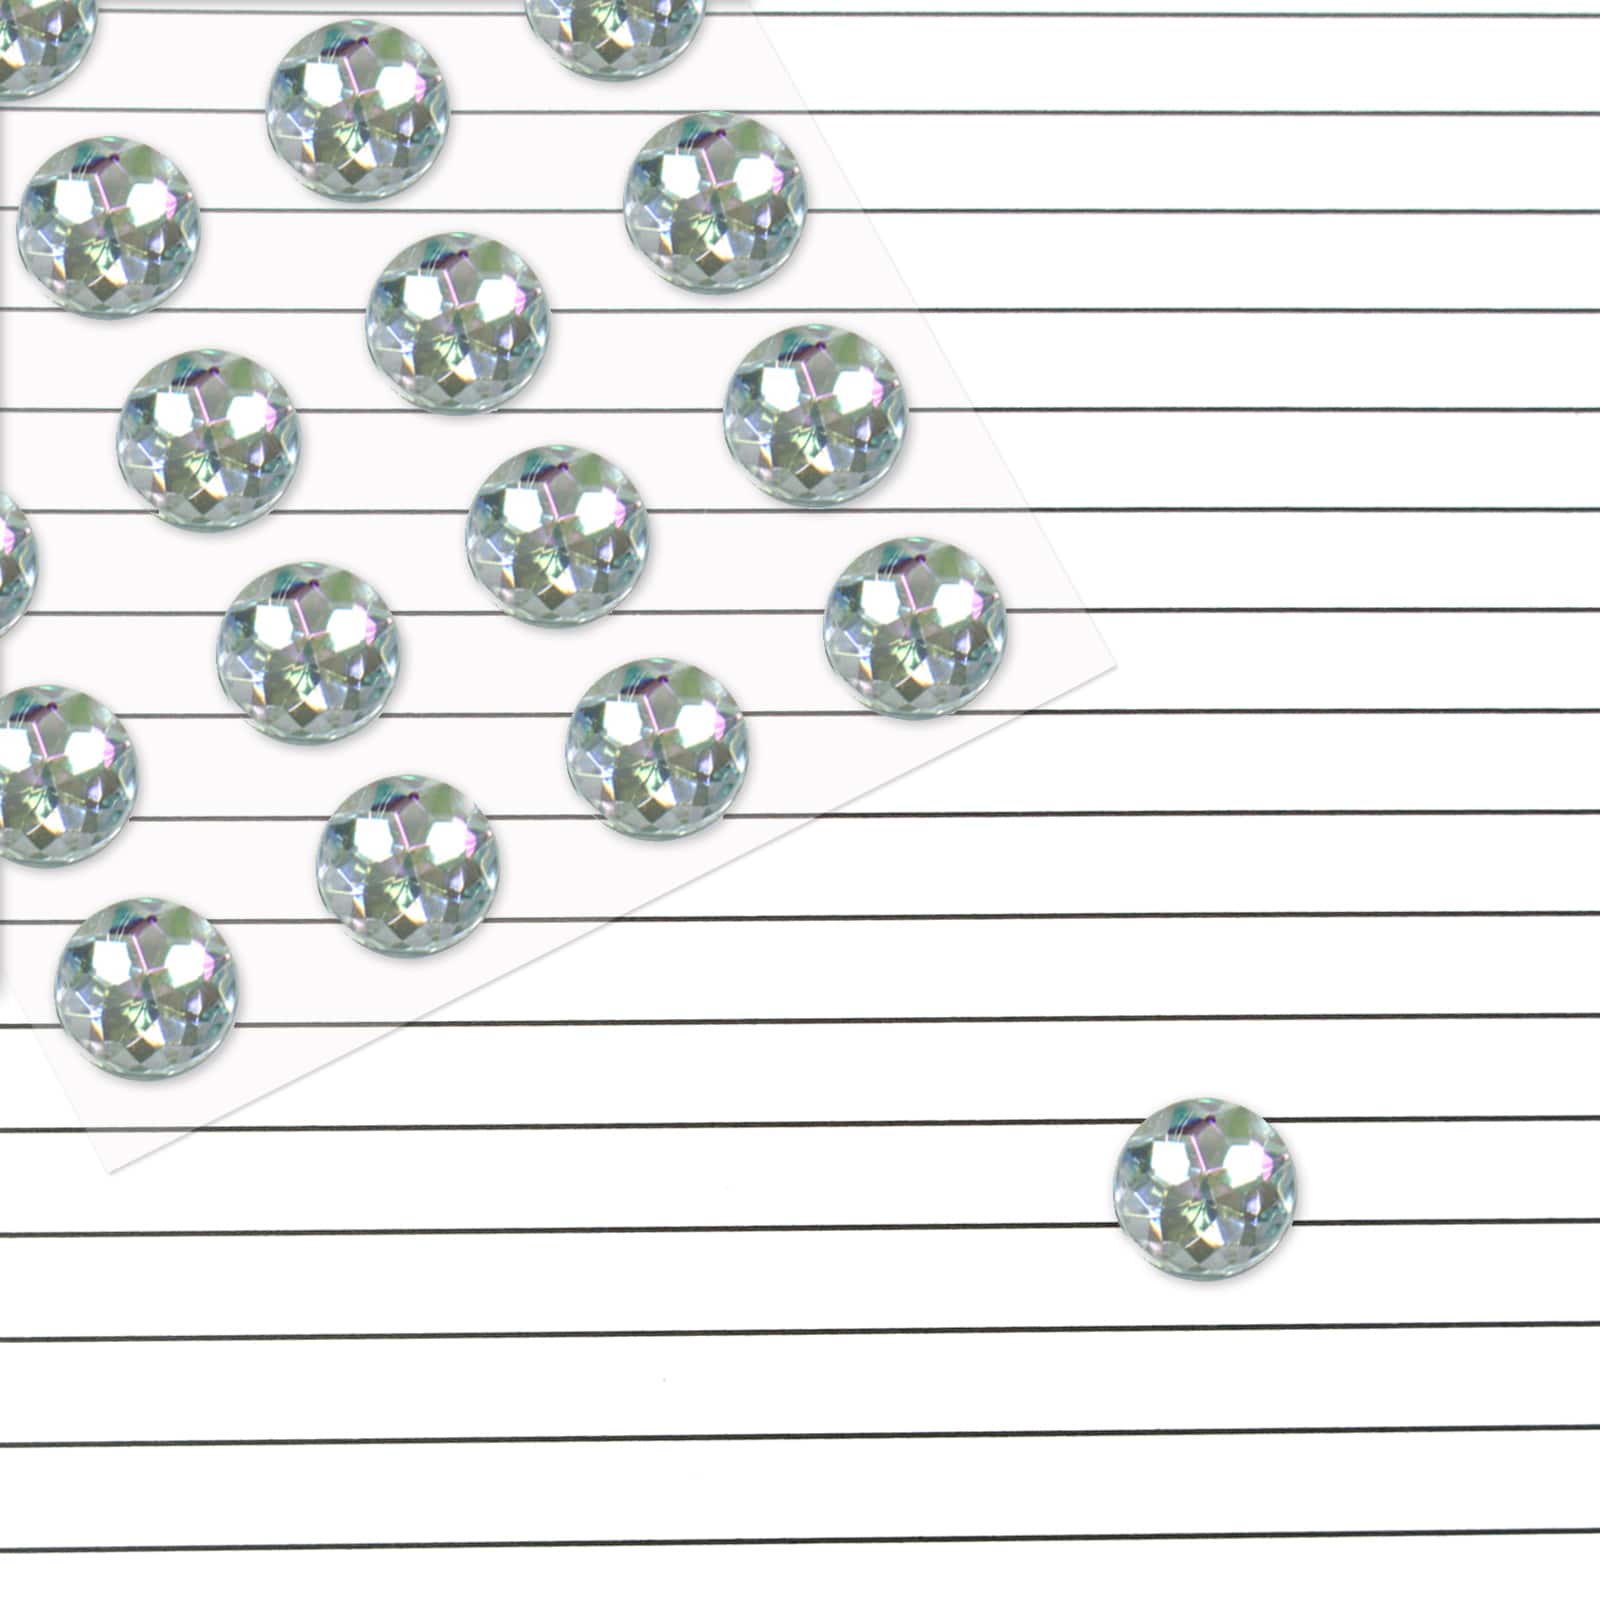 Clear Star Bling Stickers By Recollections™, Michaels